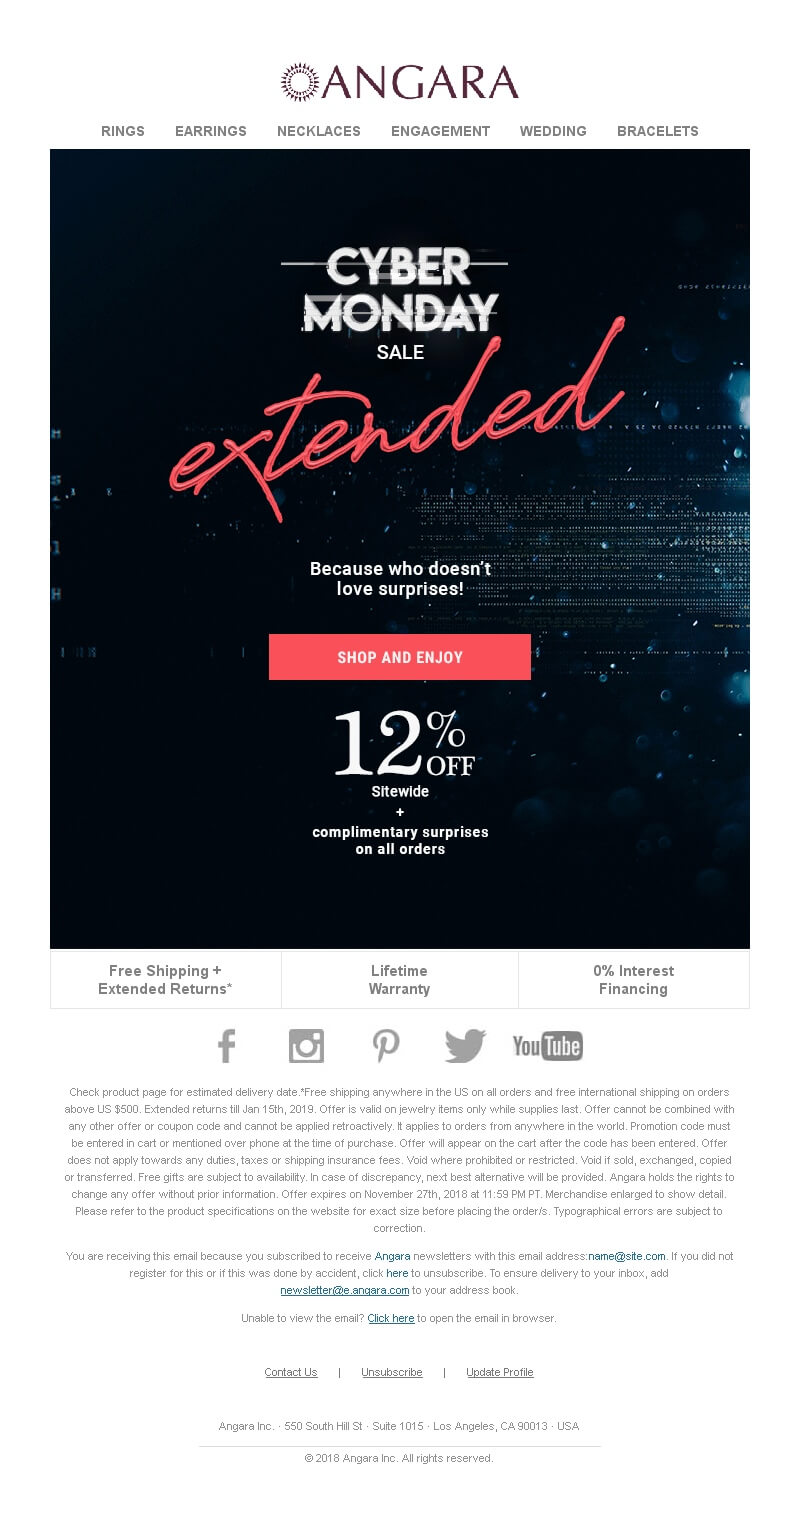 Cyber Monday Email Ideas: When You’re Not Sure What To Send 19